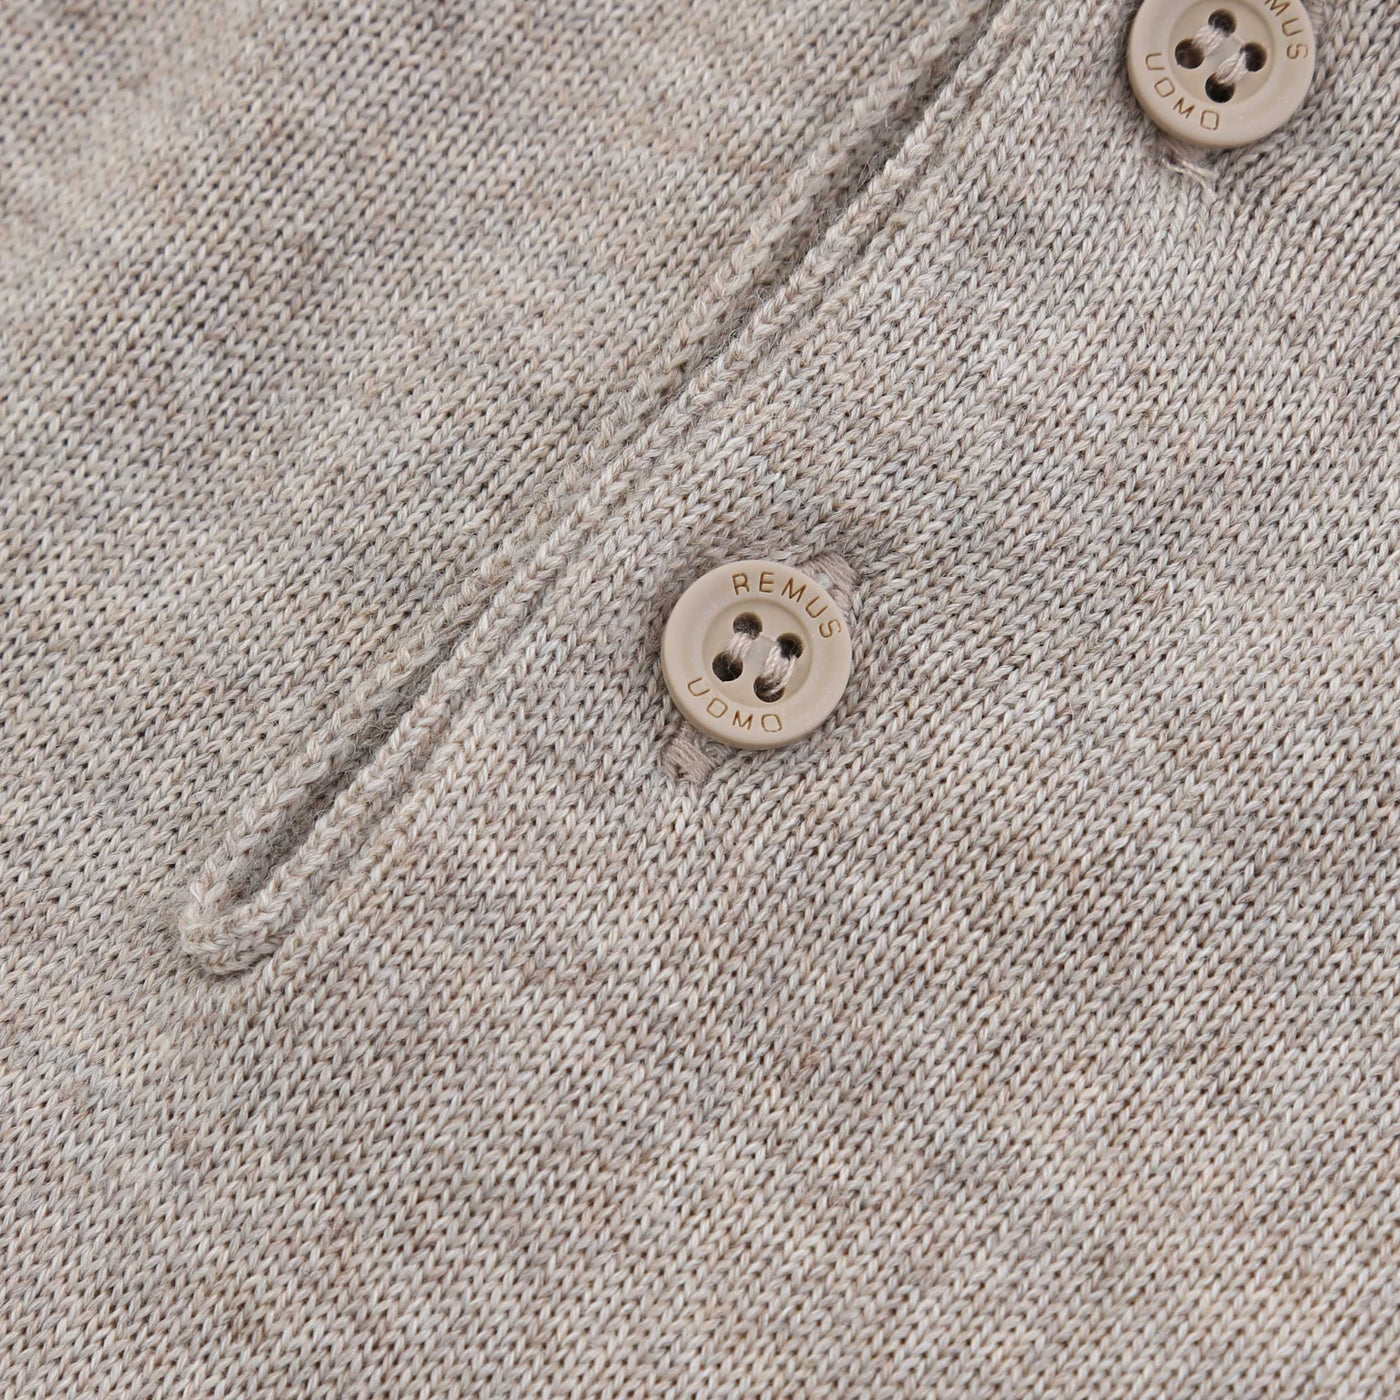 Remus Uomo 3 Button Knitted Polo Shirt in Beige Buttons